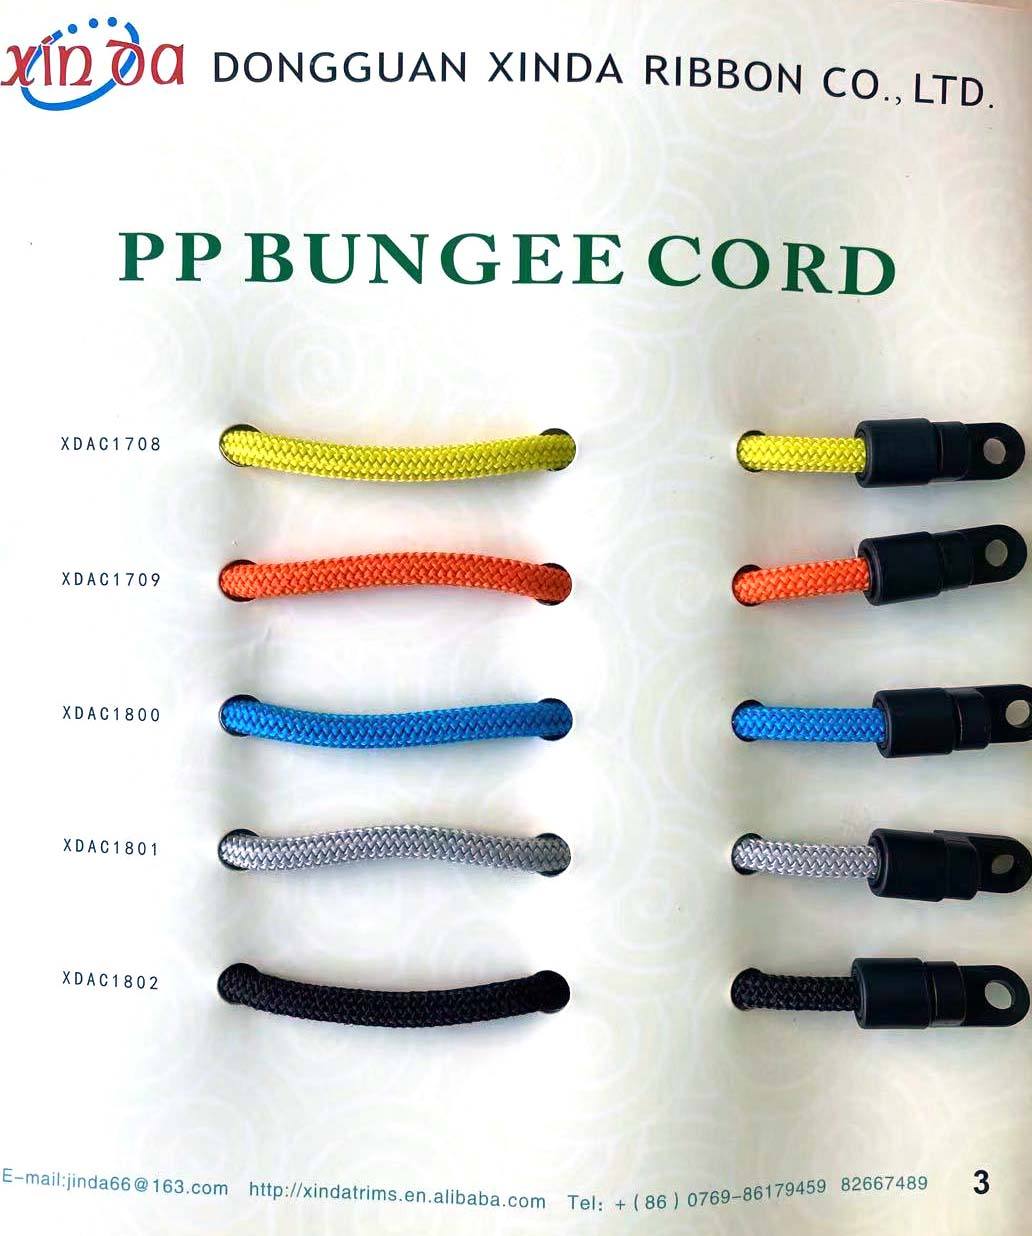 In Stock 5/16 Black Paracord Bungee Shock Cord With Metal Aglets Hooks Reflective Elastic Bungie Shock Cord With 8mm For Kayak